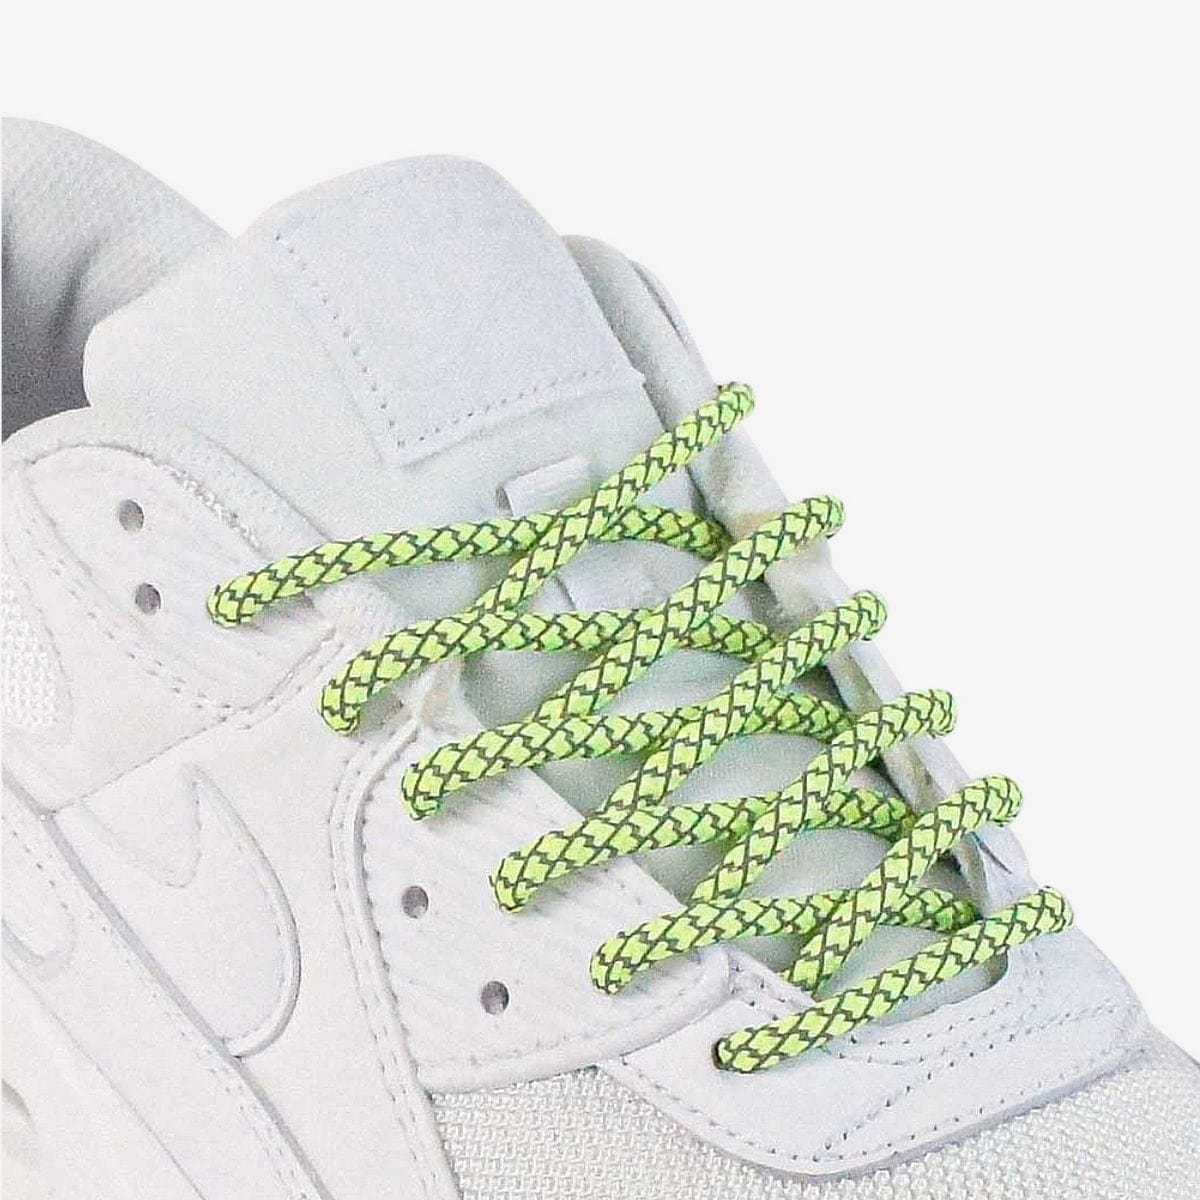 custom-color-shoelaces-on-white-sneakers-with-reflective-green-laces